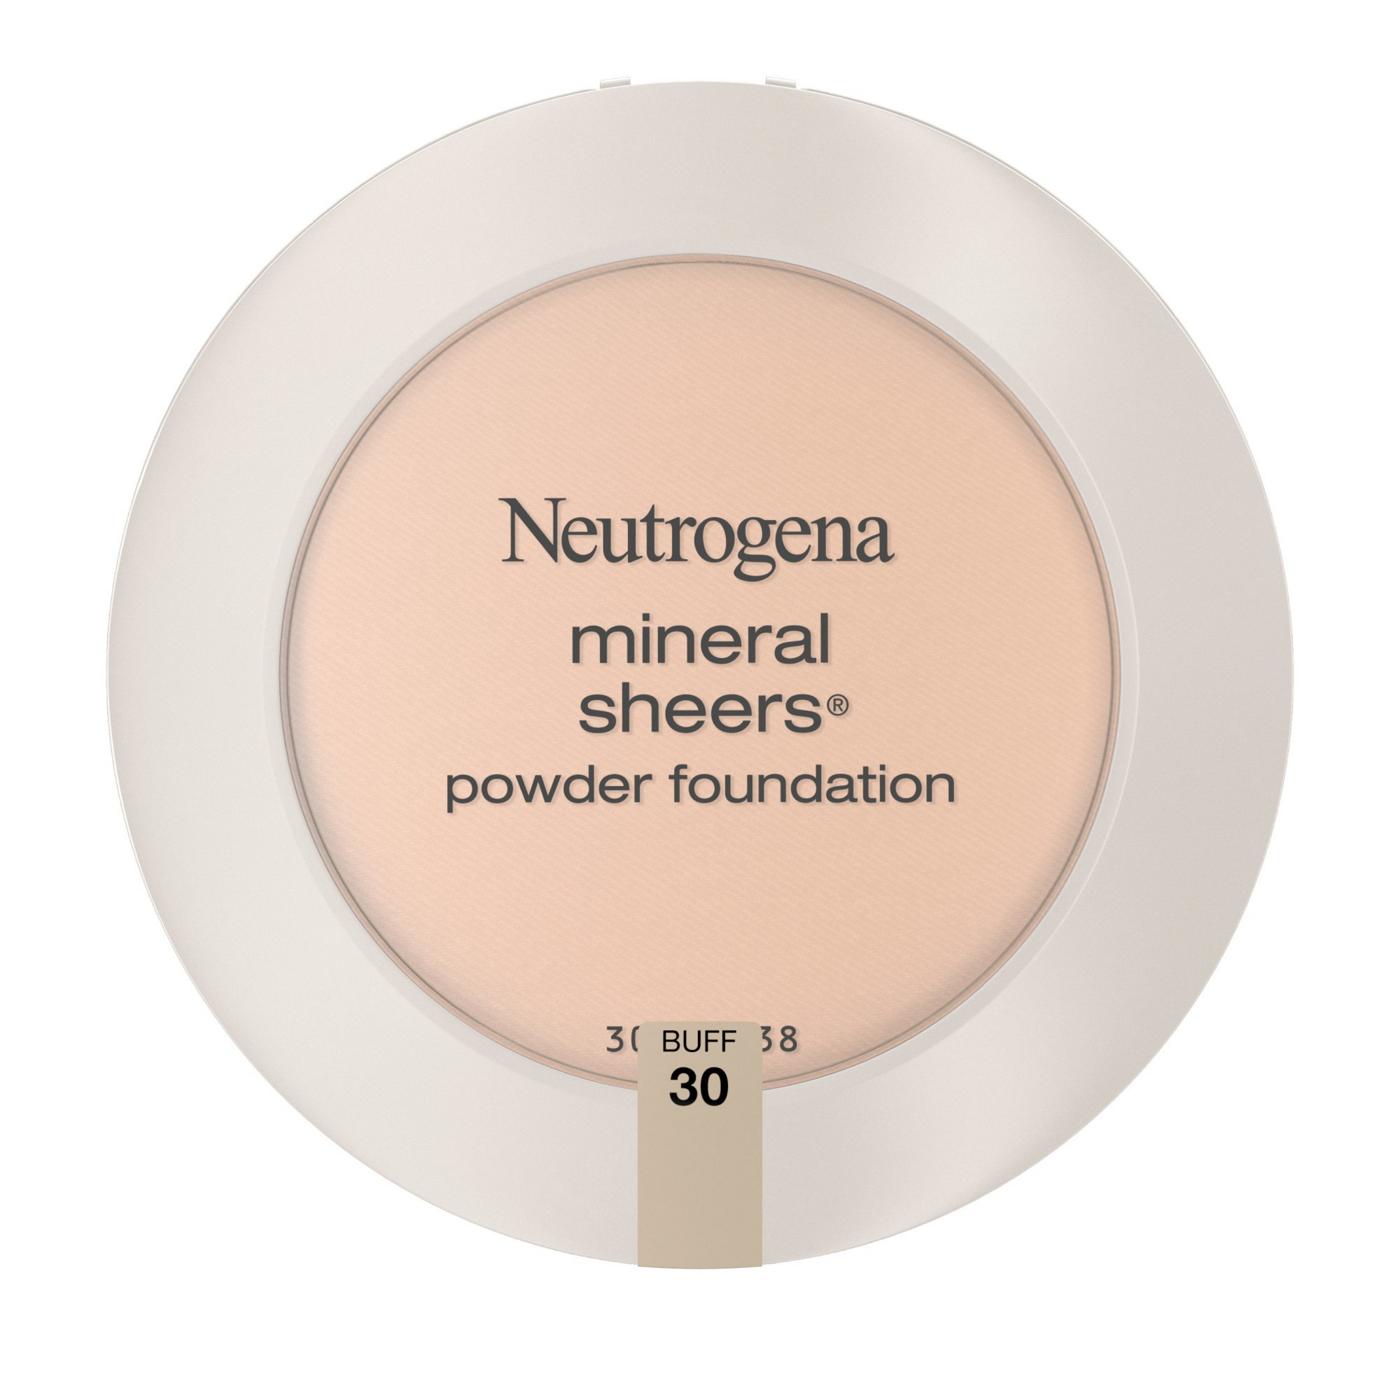 Neutrogena Mineral Sheers Compact Powder Foundation 30 Buff; image 1 of 6